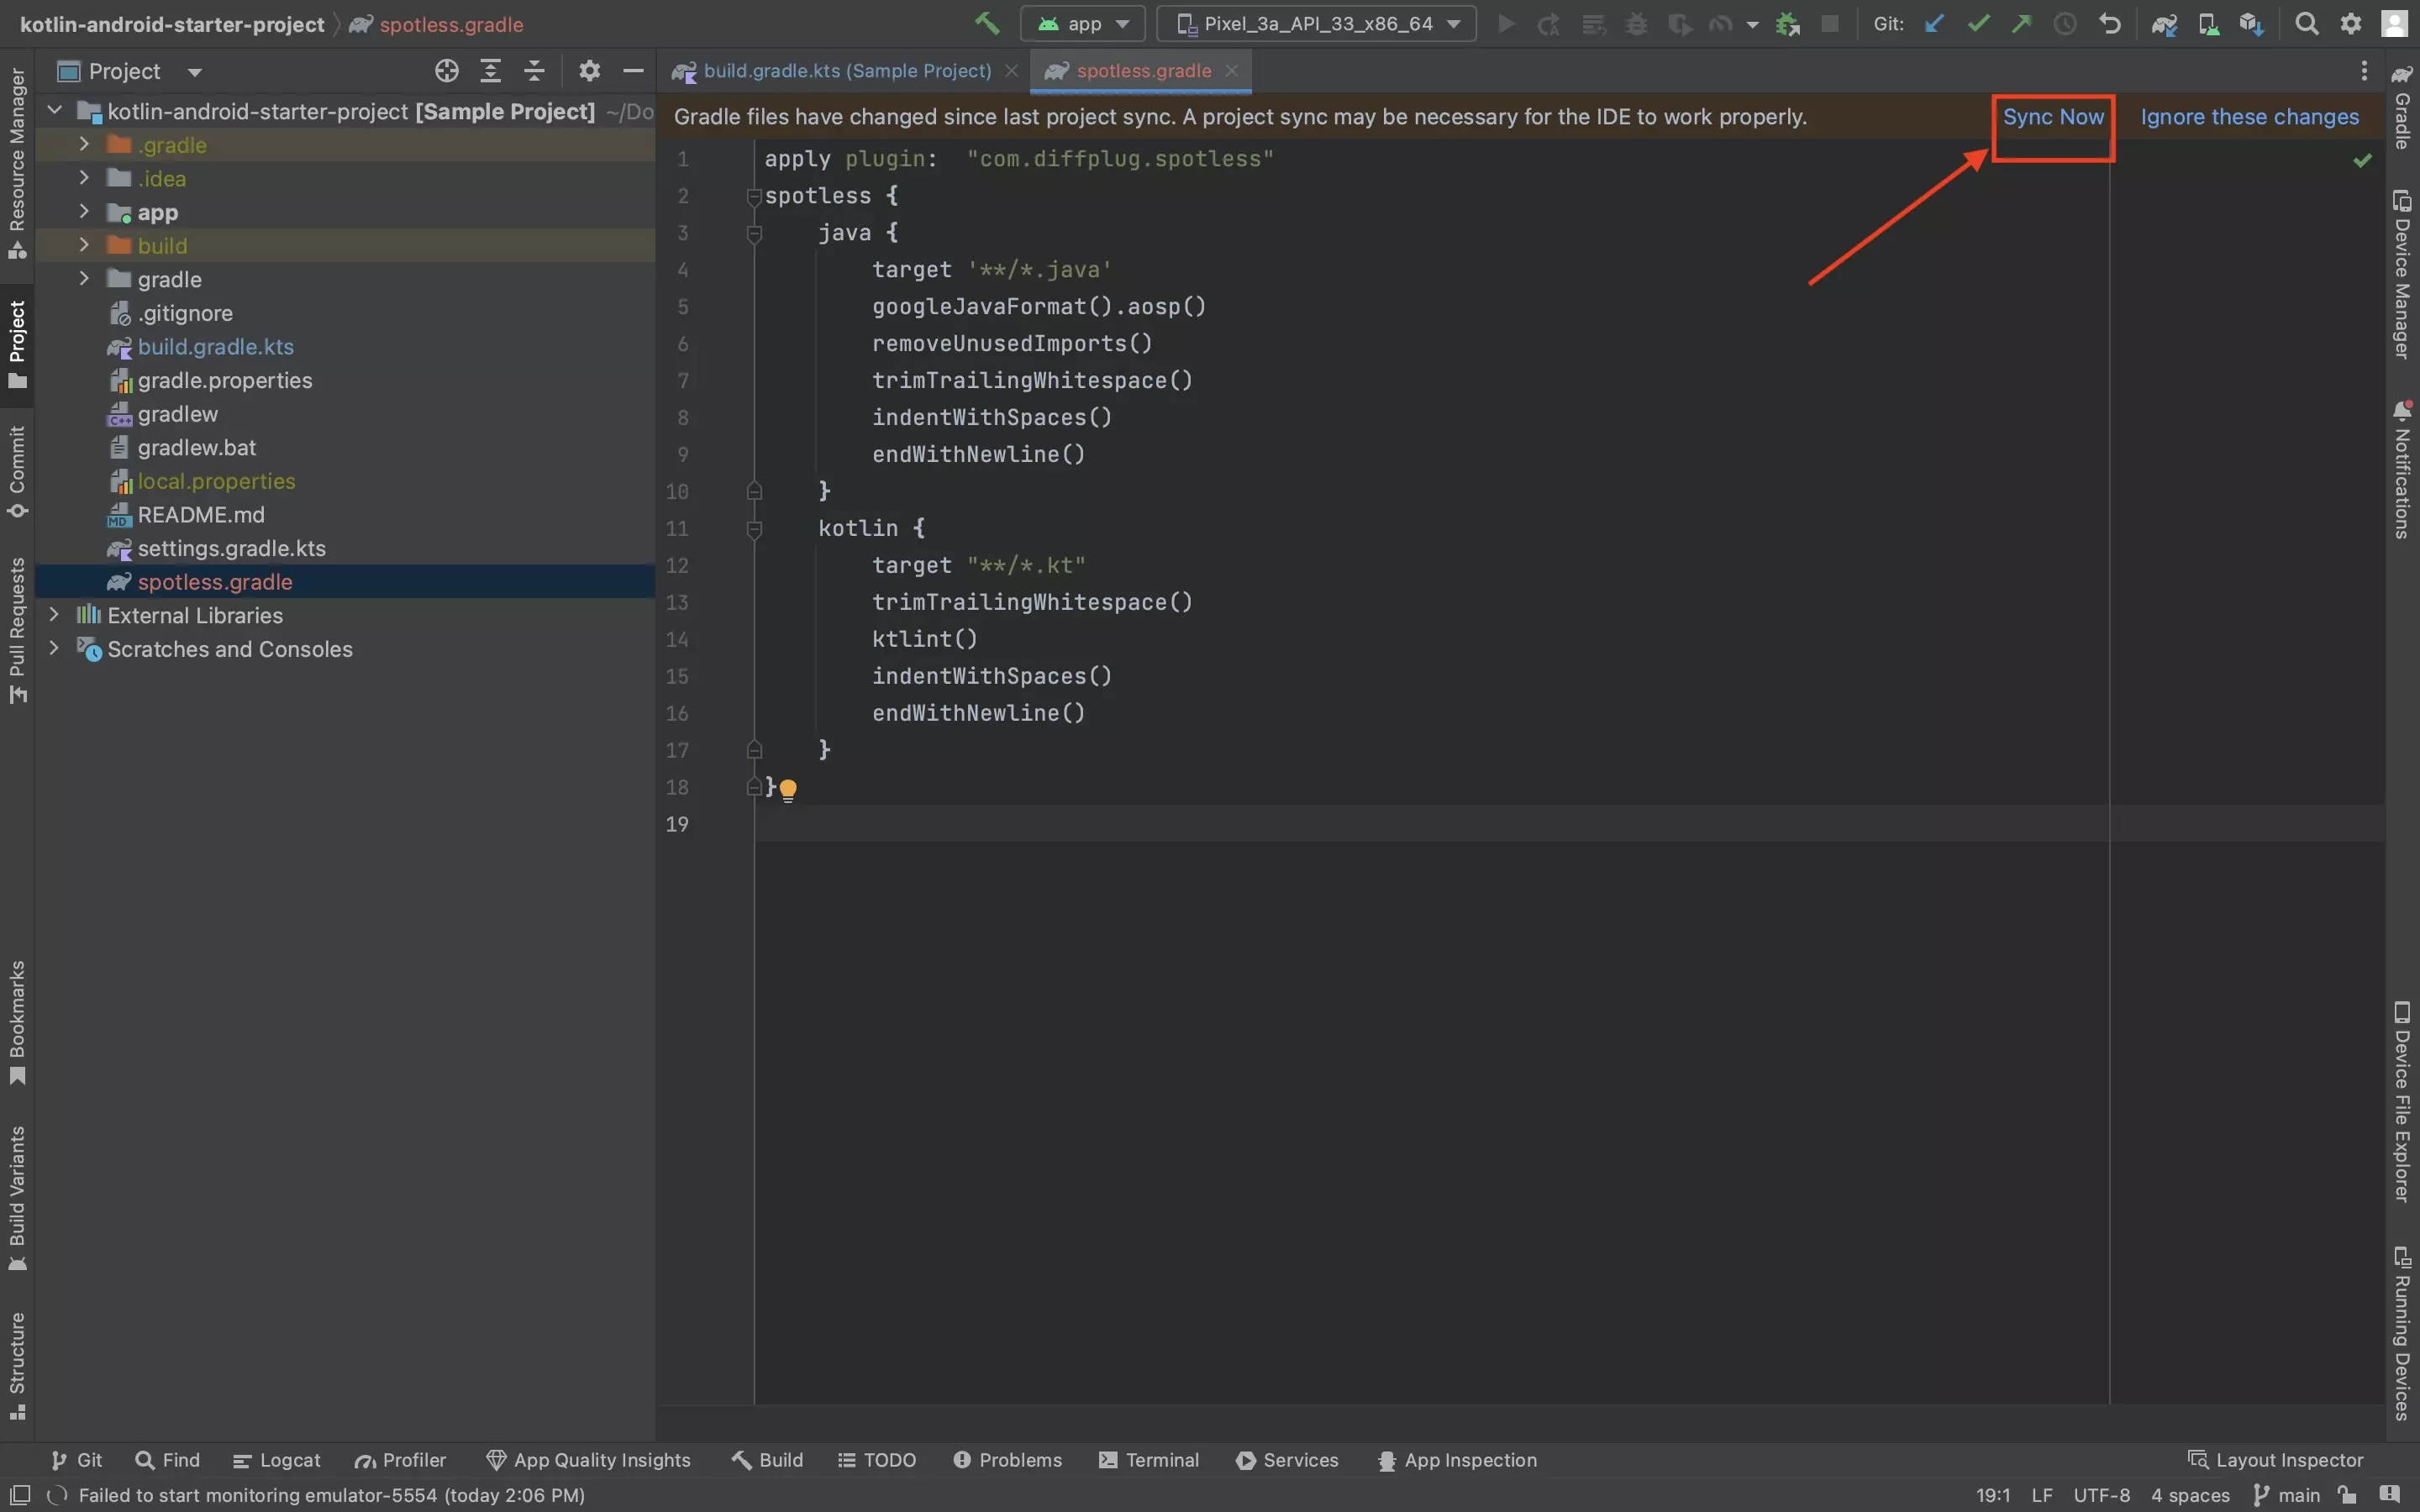 A screenshot of Android Studio showing the spotless.gradle file. Highlighted is the "Sync Now" button that appears on a bar, informing you that the grades must be synced in order for changes to take effect. Press the "Sync Now" button.